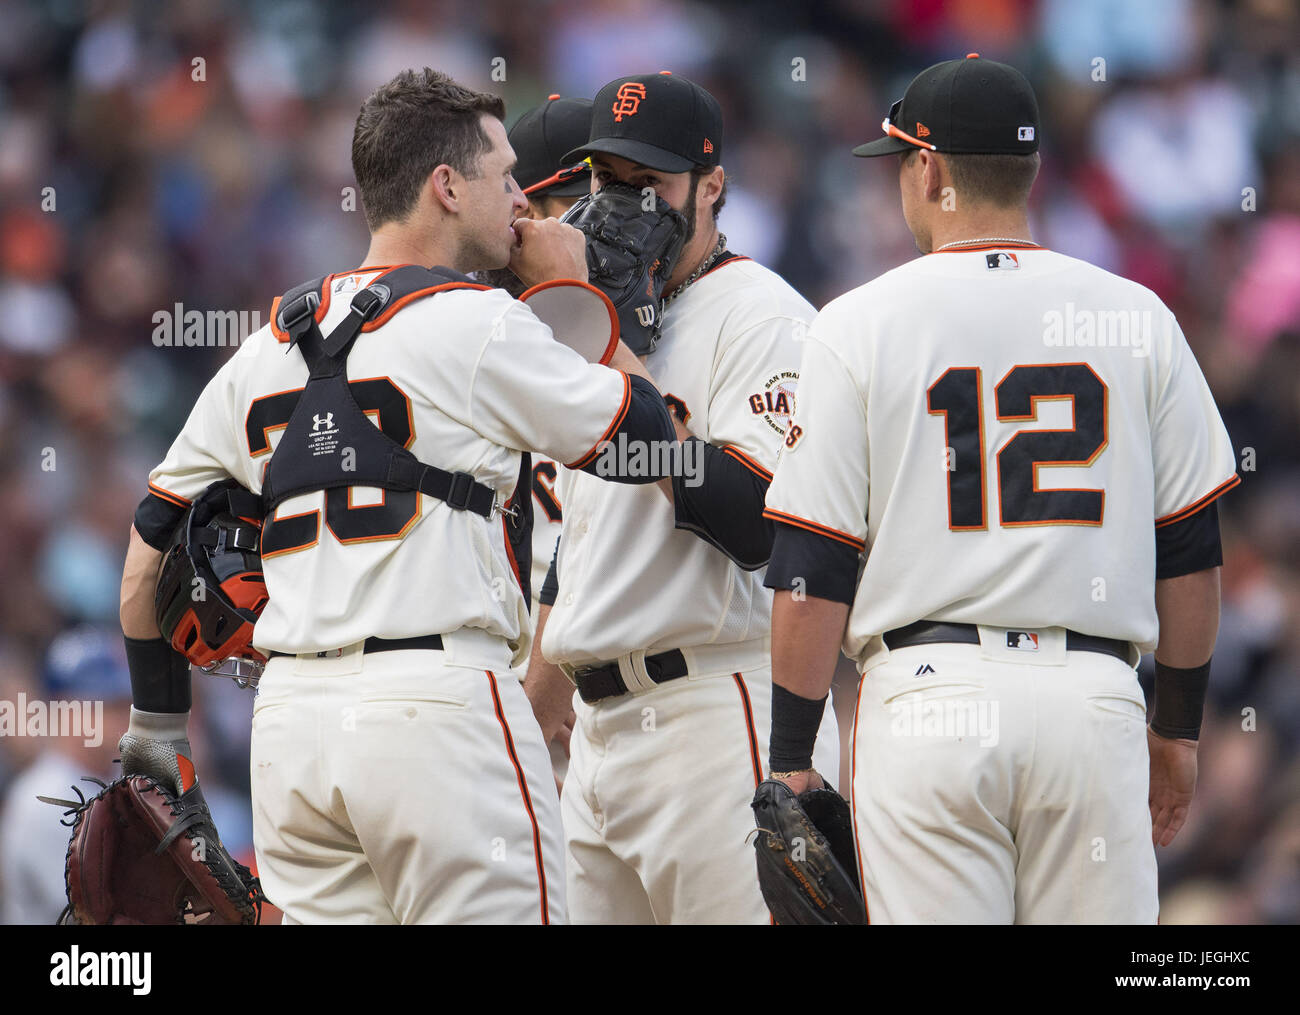 San Francisco, California, USA. 24th June, 2017. Coming into pitch in the top of the eighth inning, San Francisco Giants relief pitcher George Kontos (70) talks with catcher Buster Posey (28) and second baseman Joe Panik (12), during a MLB baseball game between the New York Mets and the San Francisco Giants on ''Giants Retro Bobblehead Day'' at AT&T Park in San Francisco, California. Valerie Shoaps/CSM/Alamy Live News Stock Photo